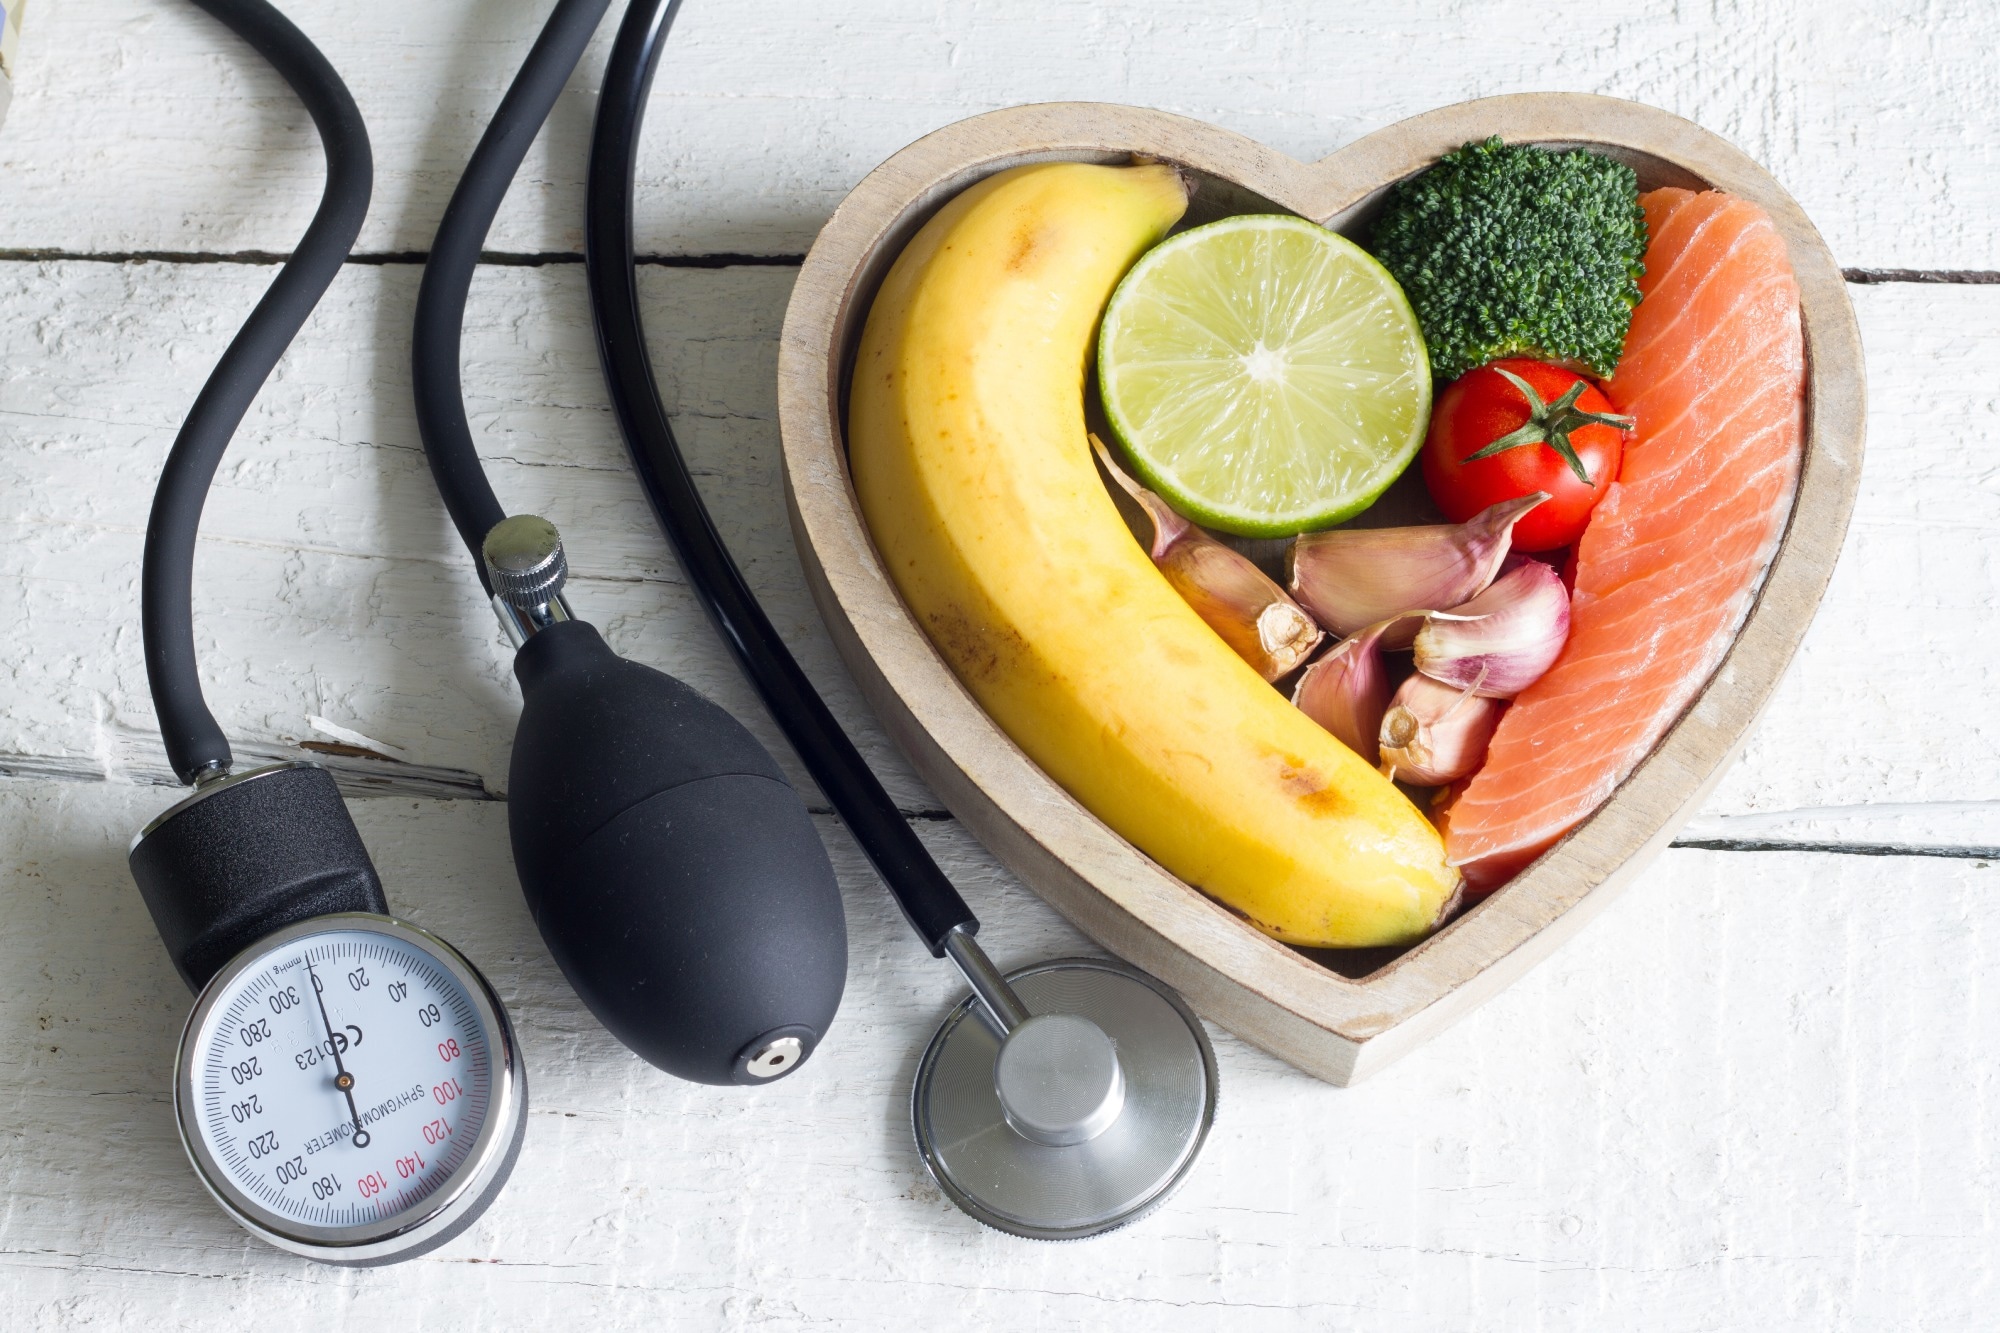 Review: The role of diet in the prevention of hypertension and management of blood pressure: An umbrella review of meta-analyses of interventional and observational studies. Image Credit: udra11 / Shutterstock